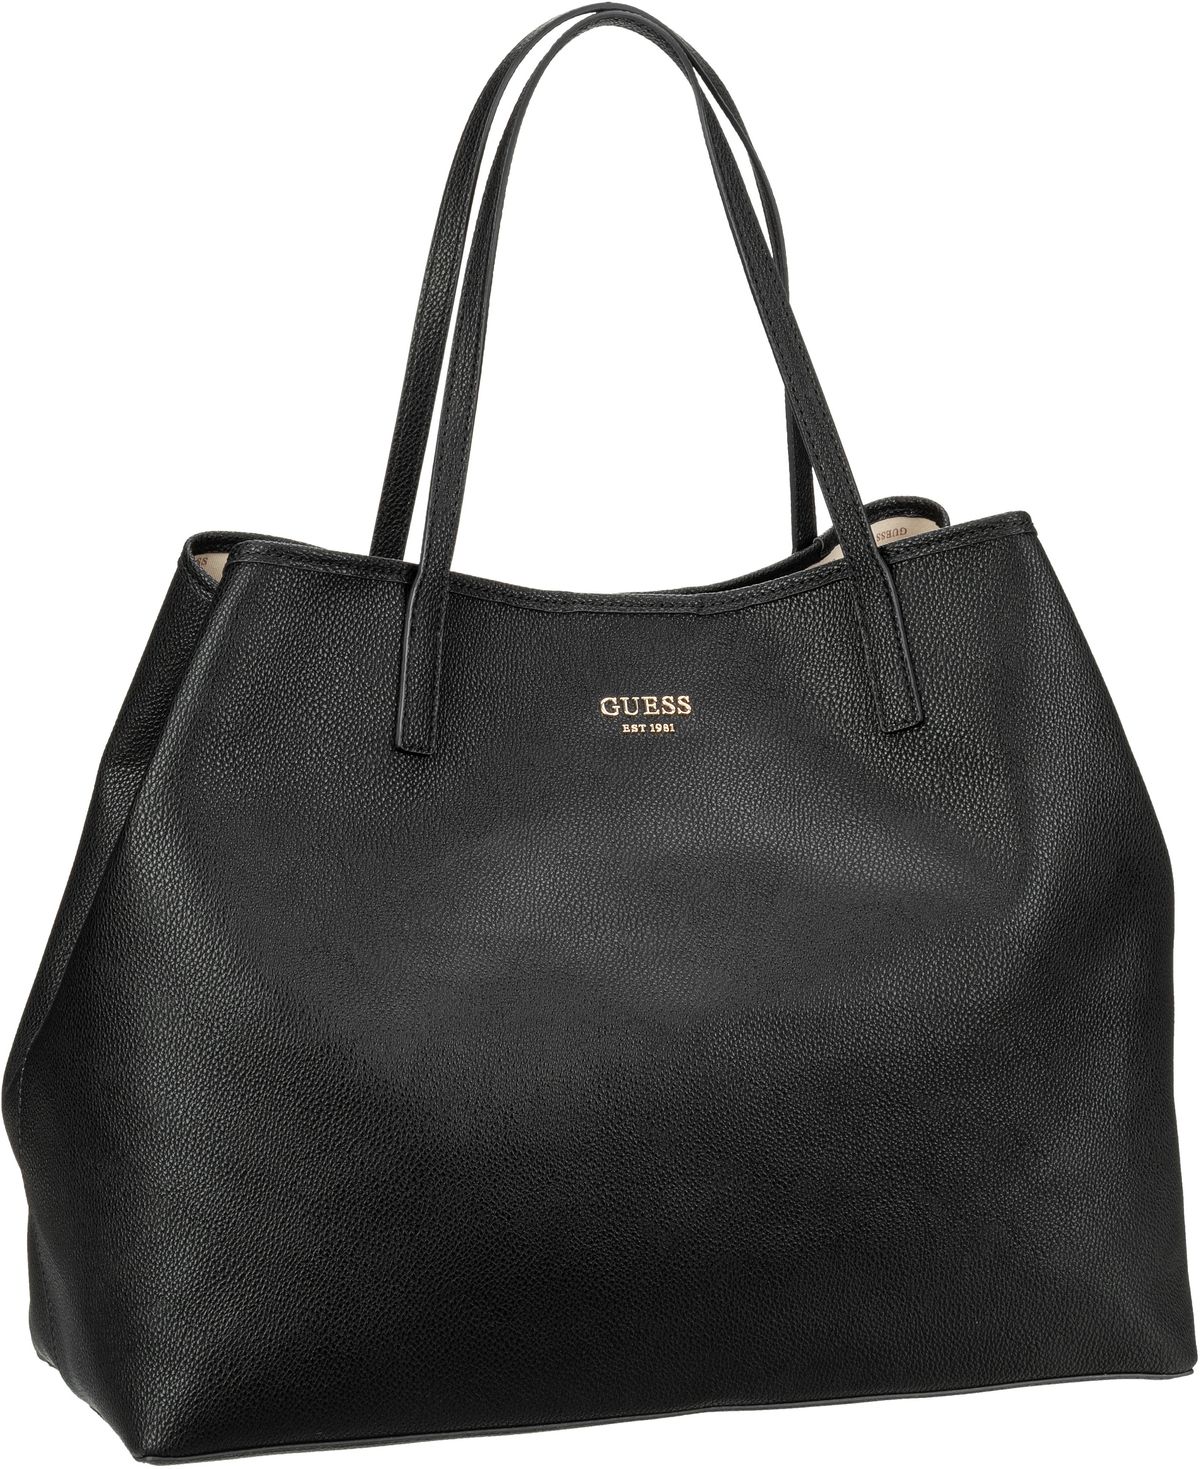 Guess Vikky Extra Large Tote - Black